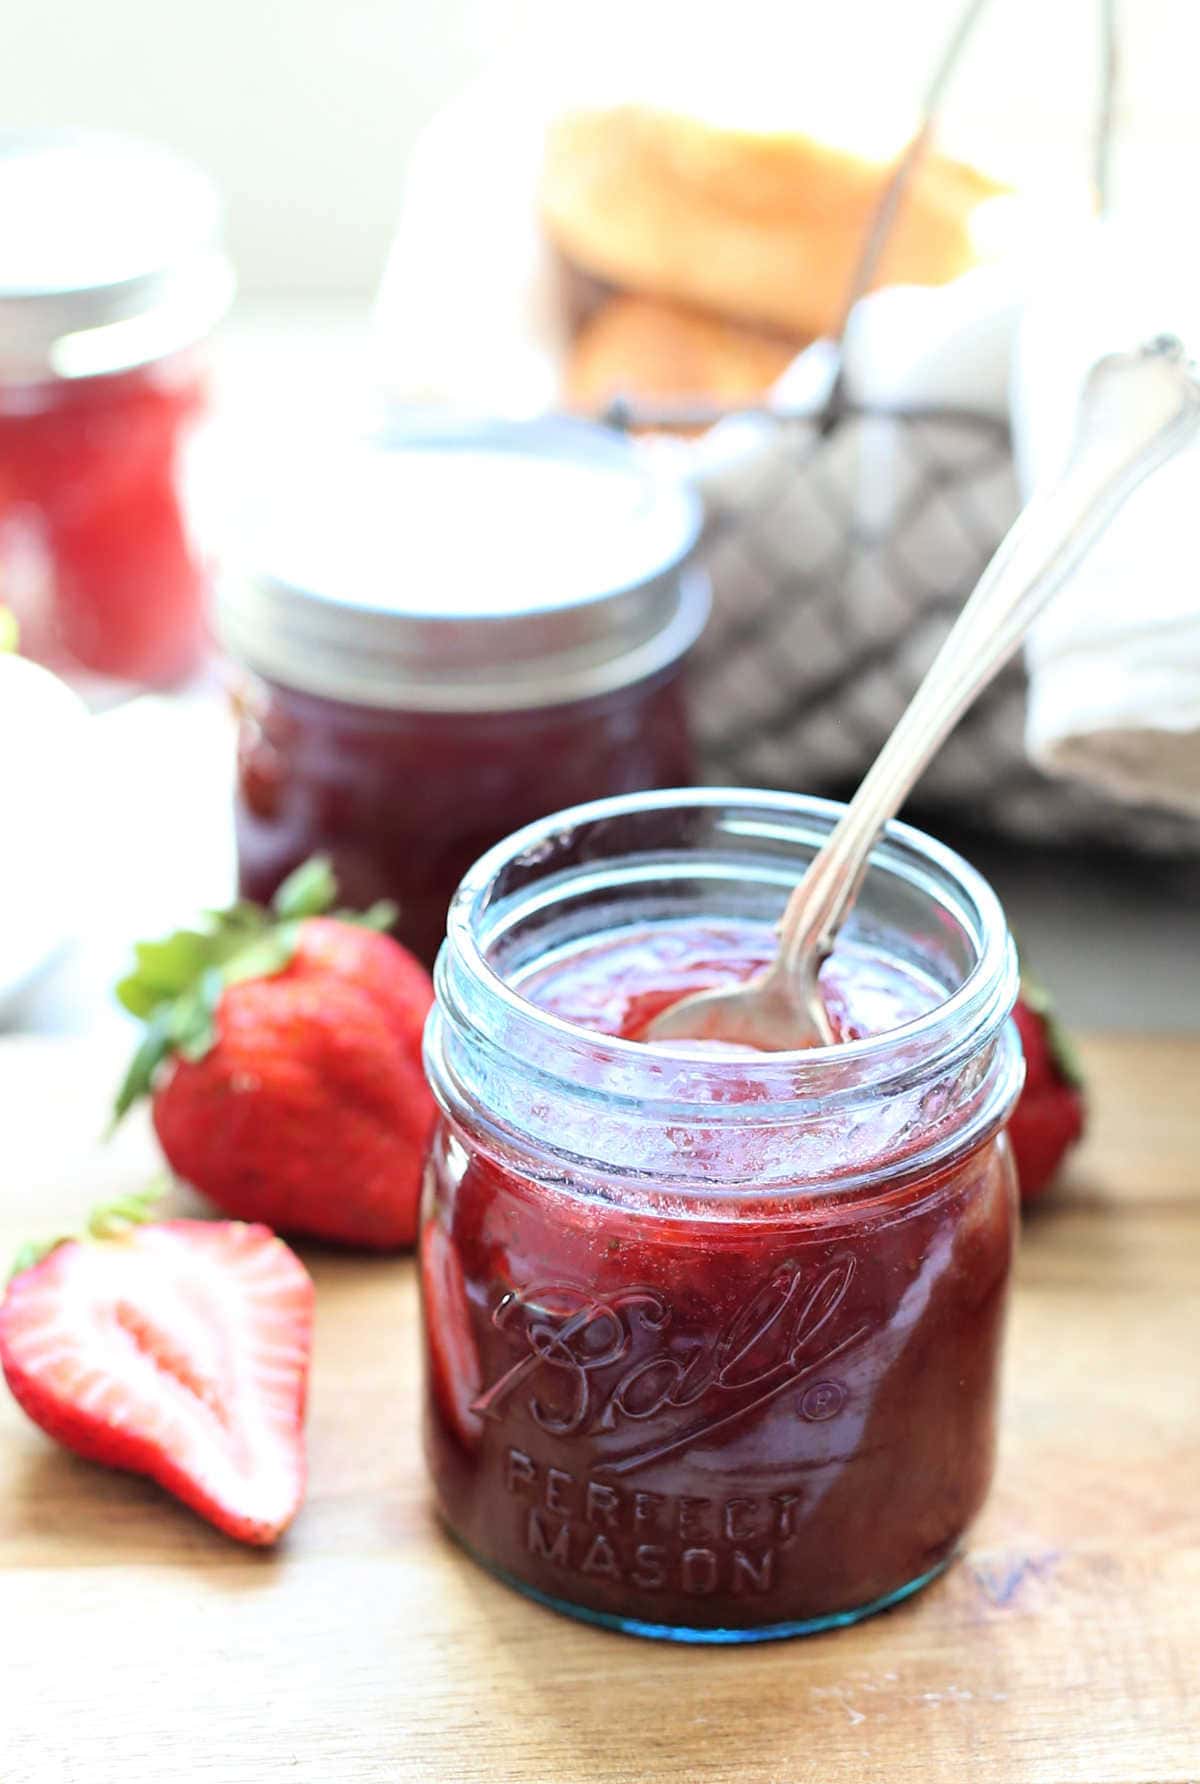 homemade strawberry jam in a jar with a spoon and fresh sliced strawberries next to it